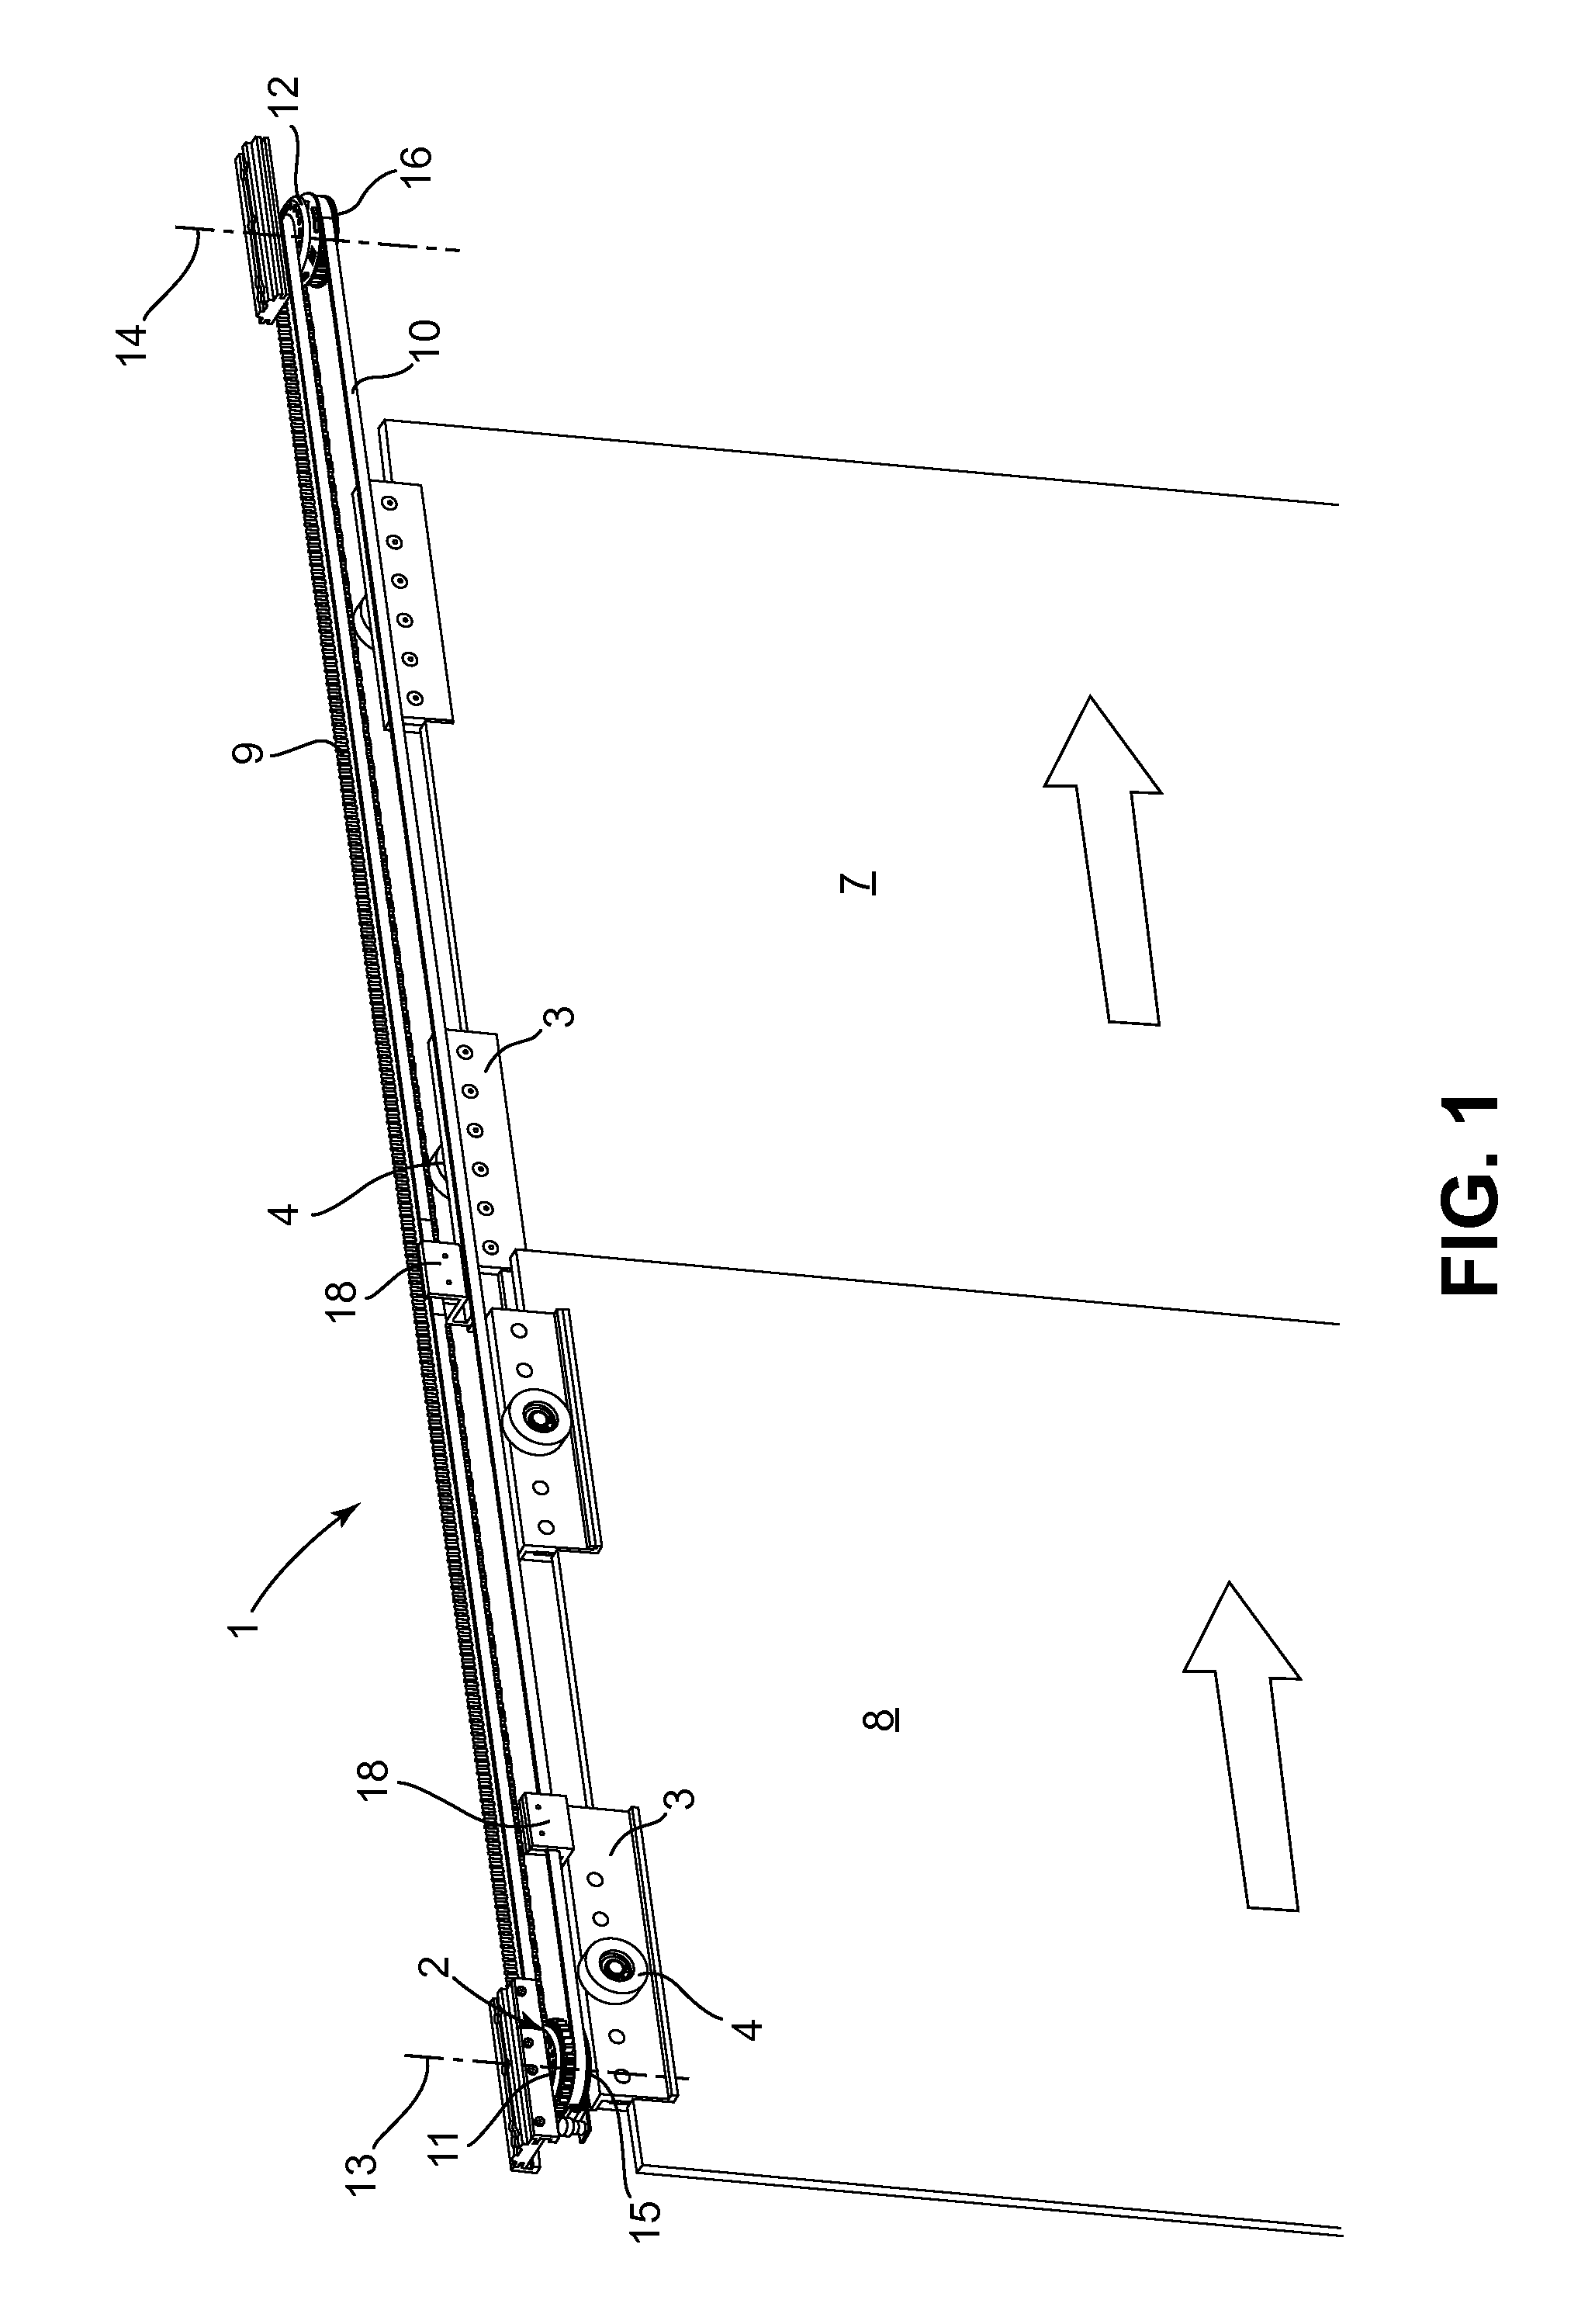 Simultaneous displacement device for sliding doors